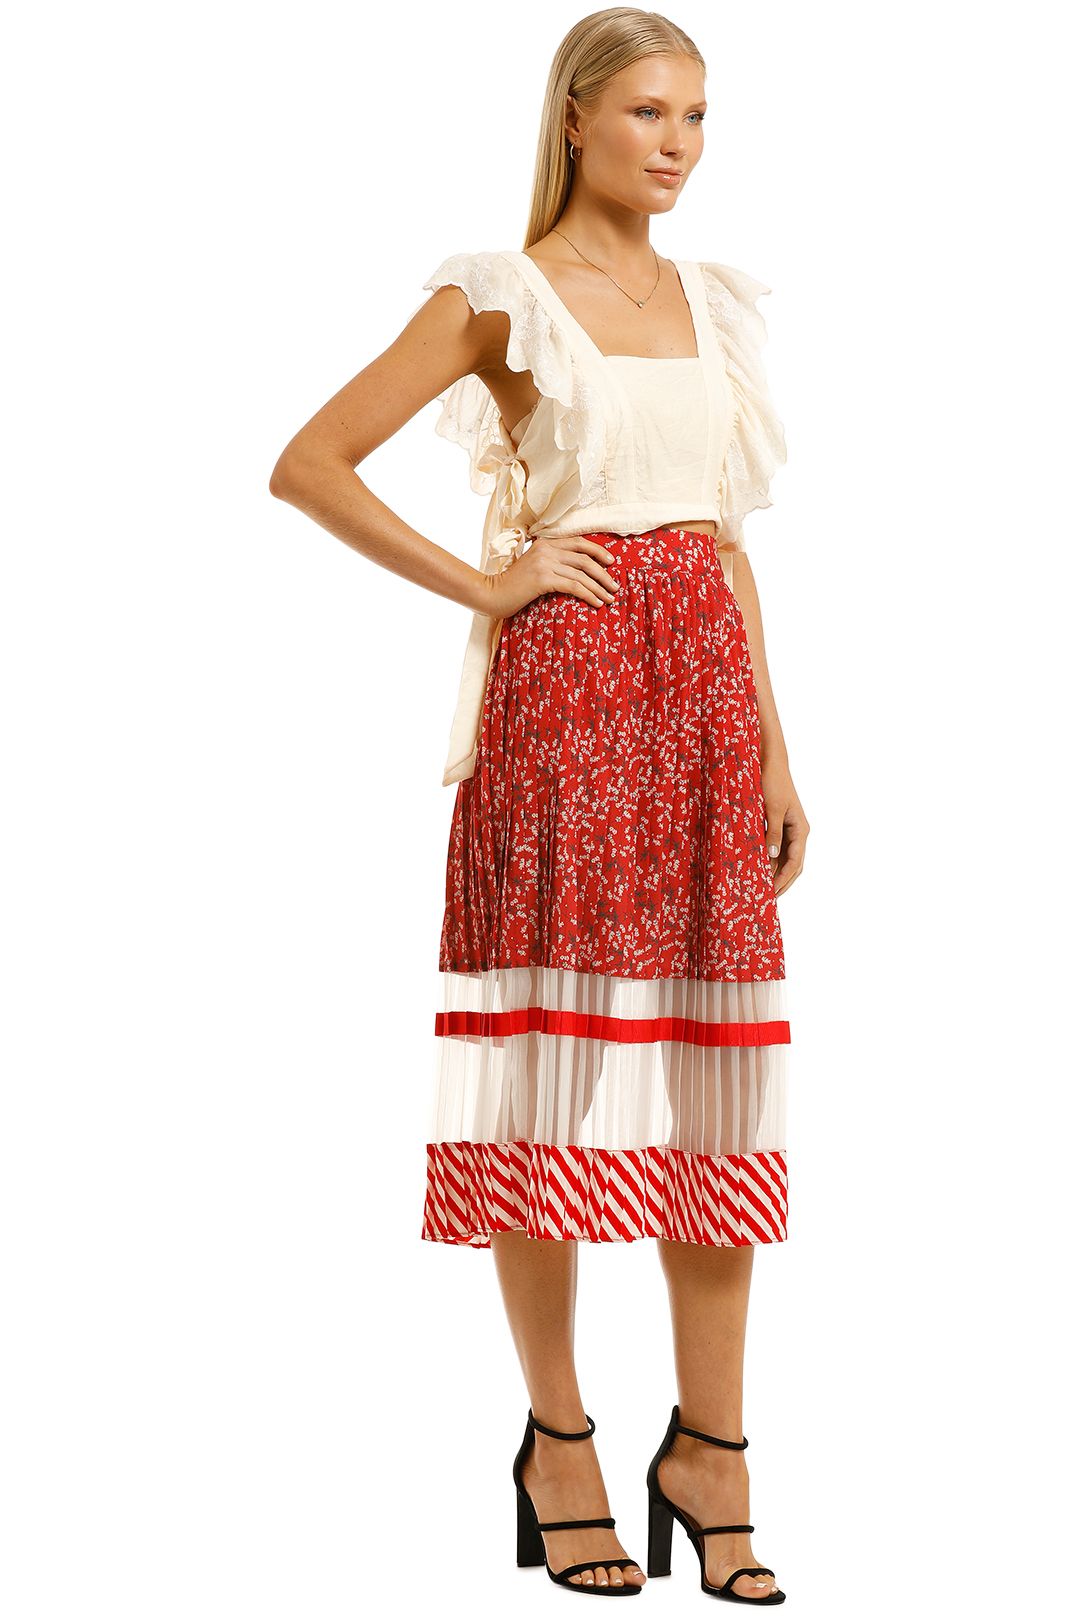 Hot Pleat Skirt In Red By Curate By Trelise Cooper For Hire Glamcorner 8246